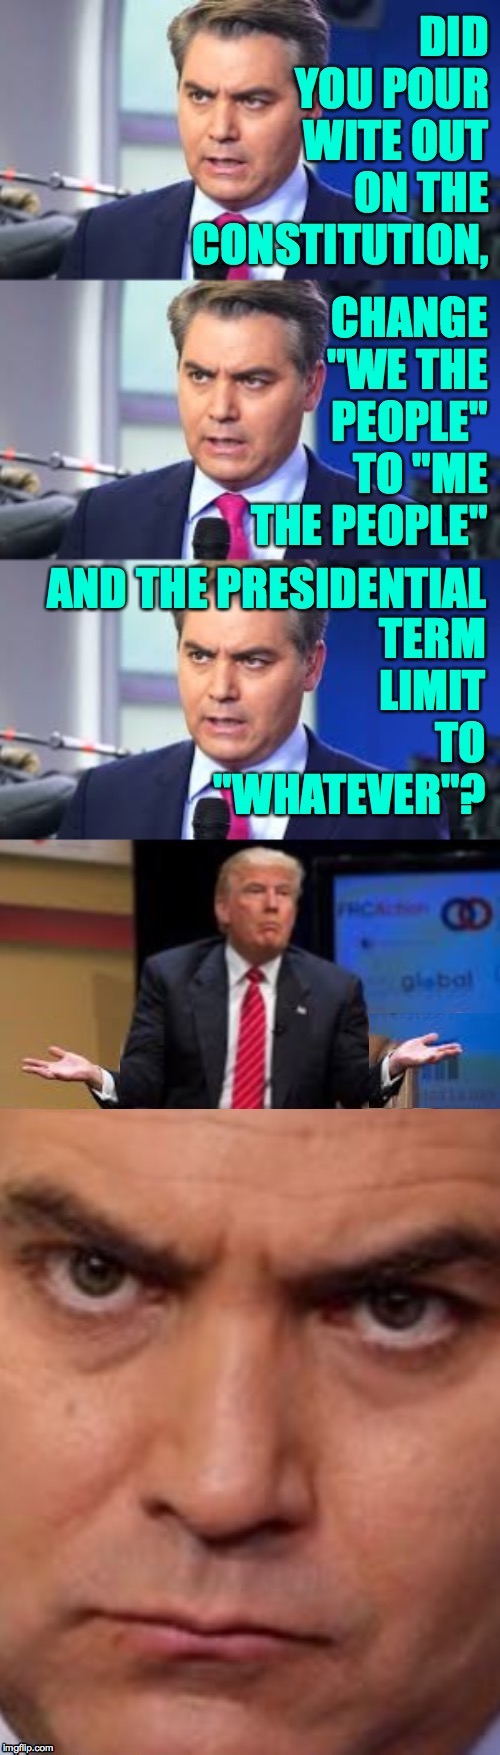 Small idle hands are the Devil's workshop. | image tagged in memes,jim acosta,me the people,sharpie your world,small hands,trump | made w/ Imgflip meme maker